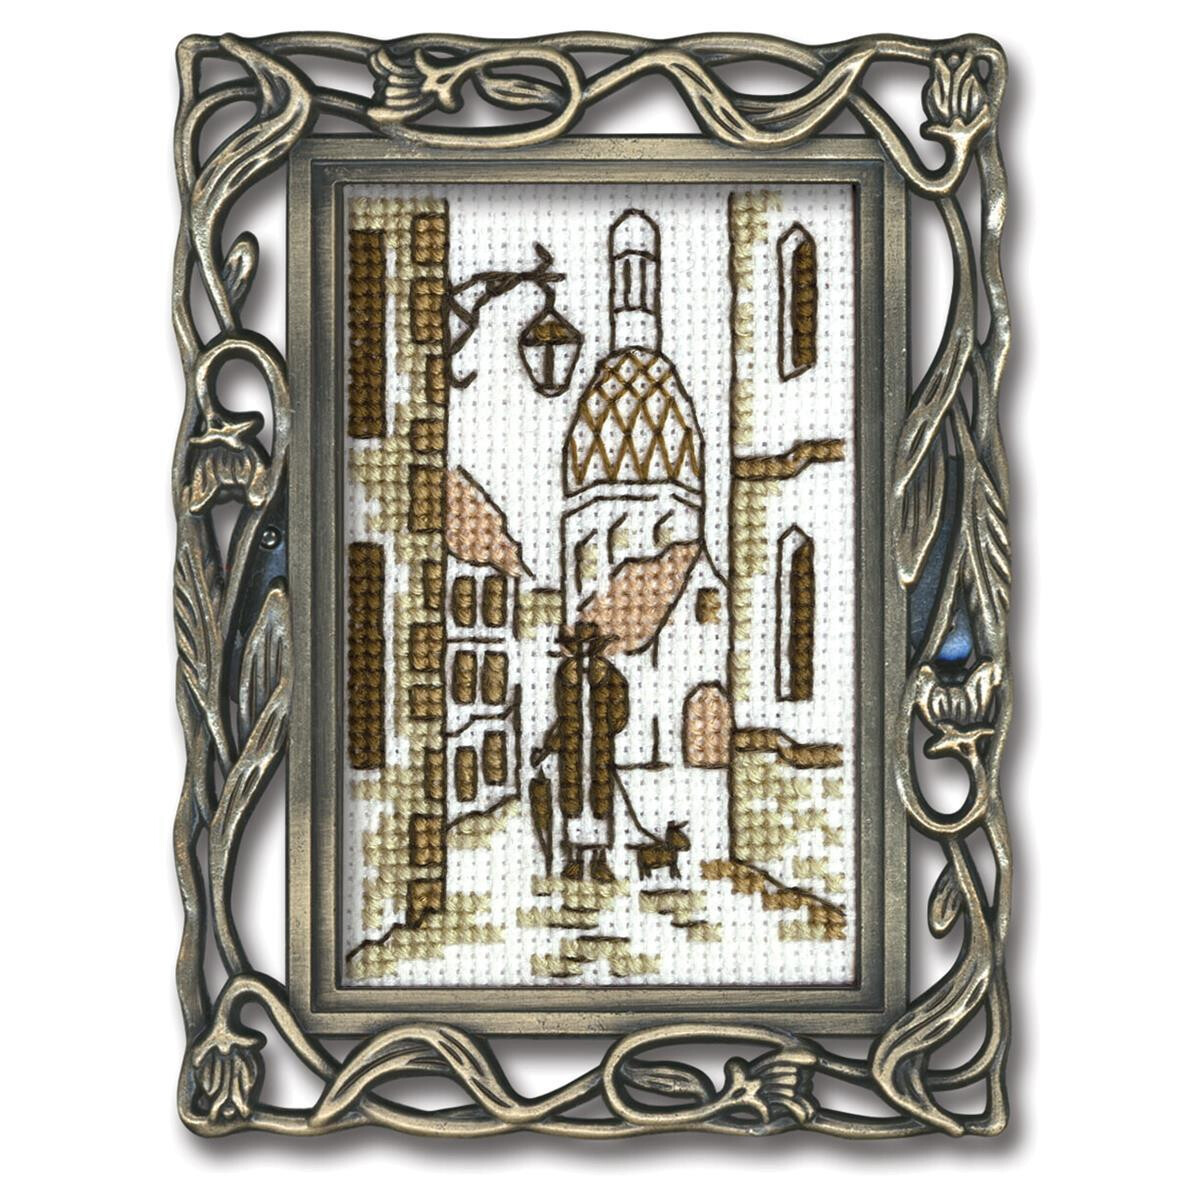 RTO counted Cross Stitch Kit with frame...